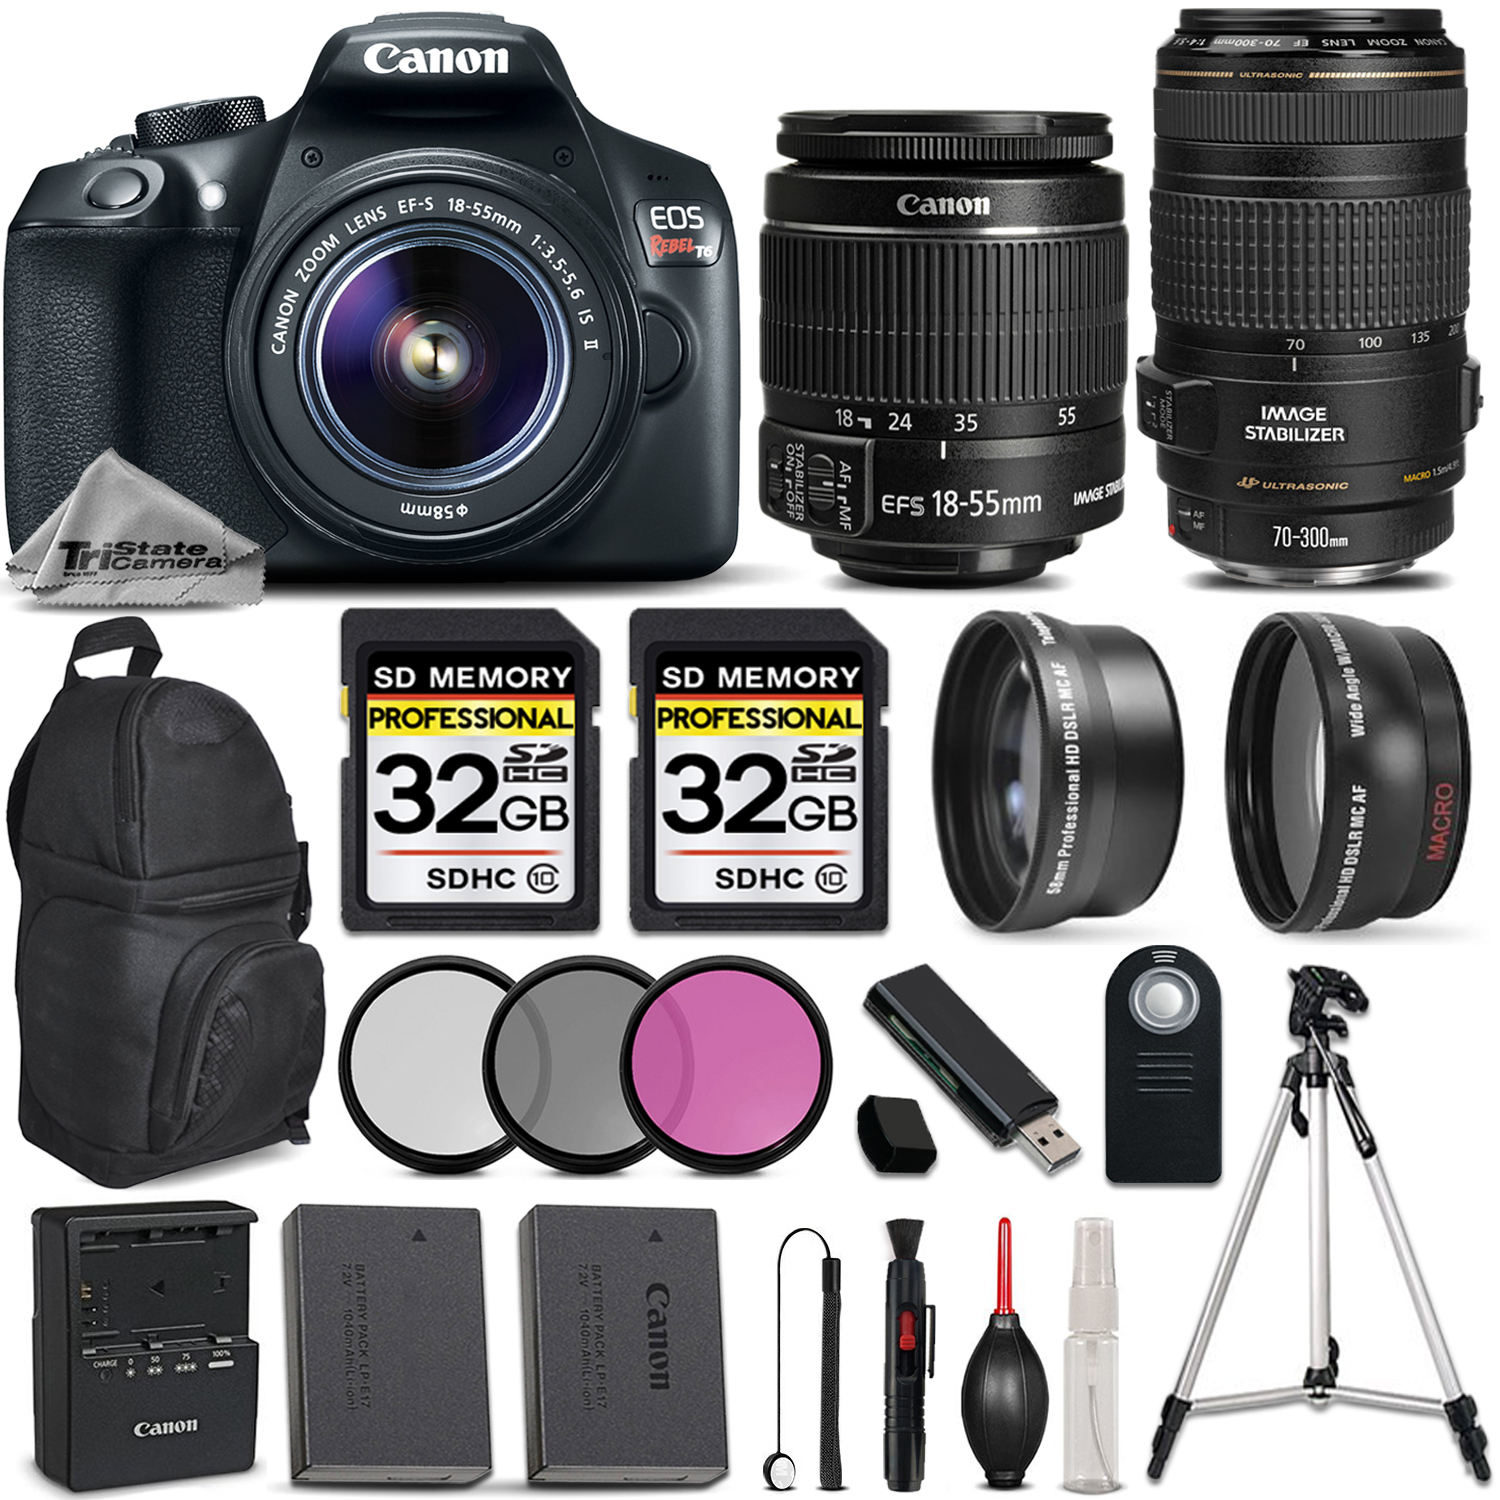 EOS REBEL T6 DSLR Camera with 18-55mm IS Lens + Canon 70-300 USM IS LENS *FREE SHIPPING*